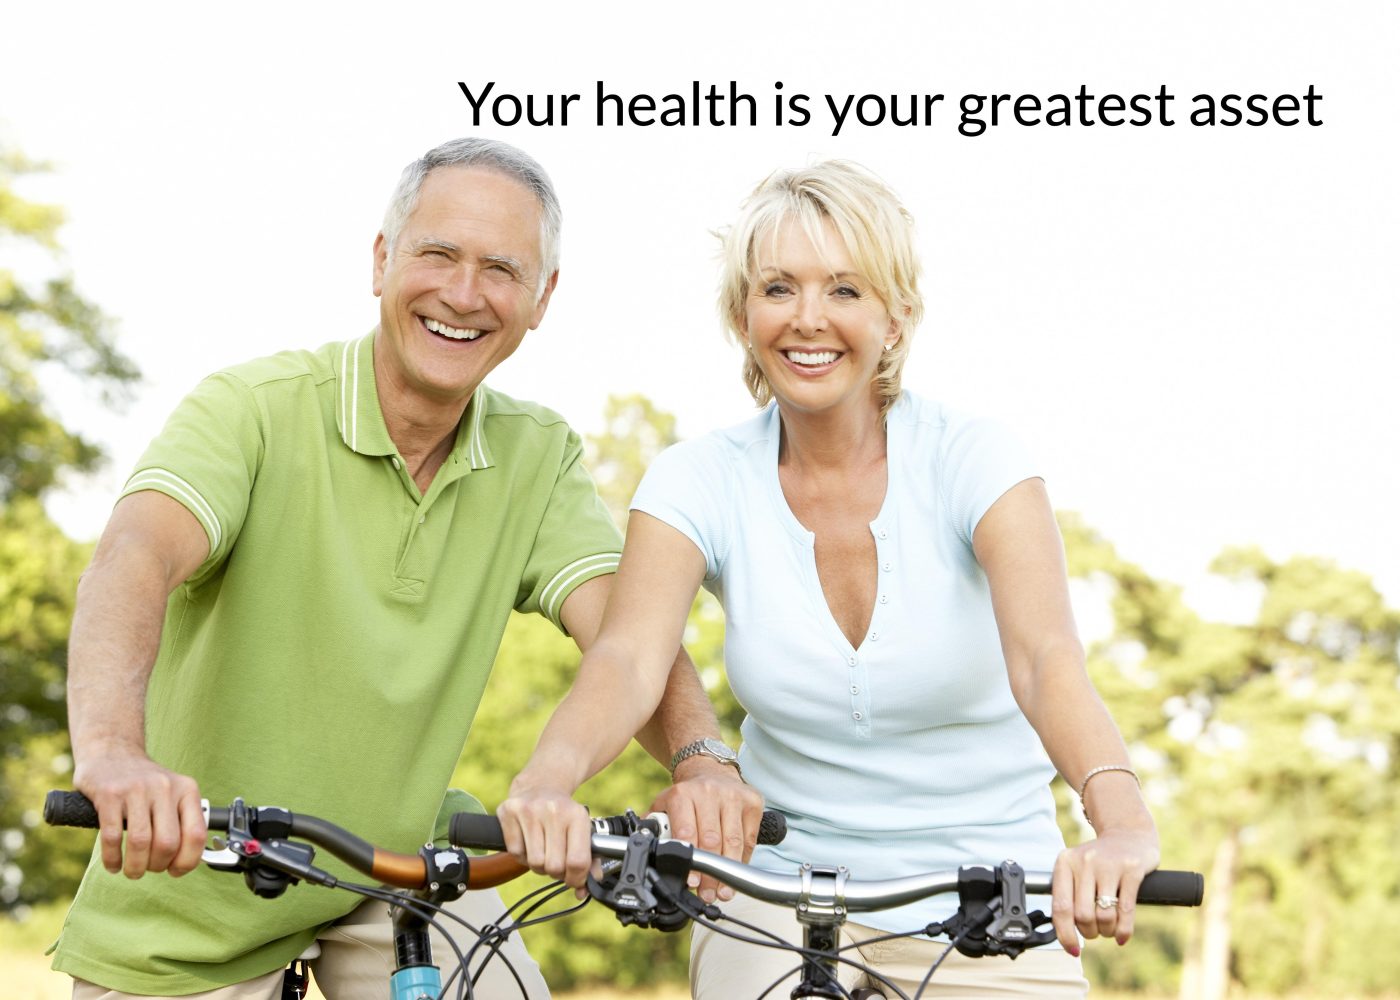 Building Your WELLth and Achieving Health Through Your Daily Habits